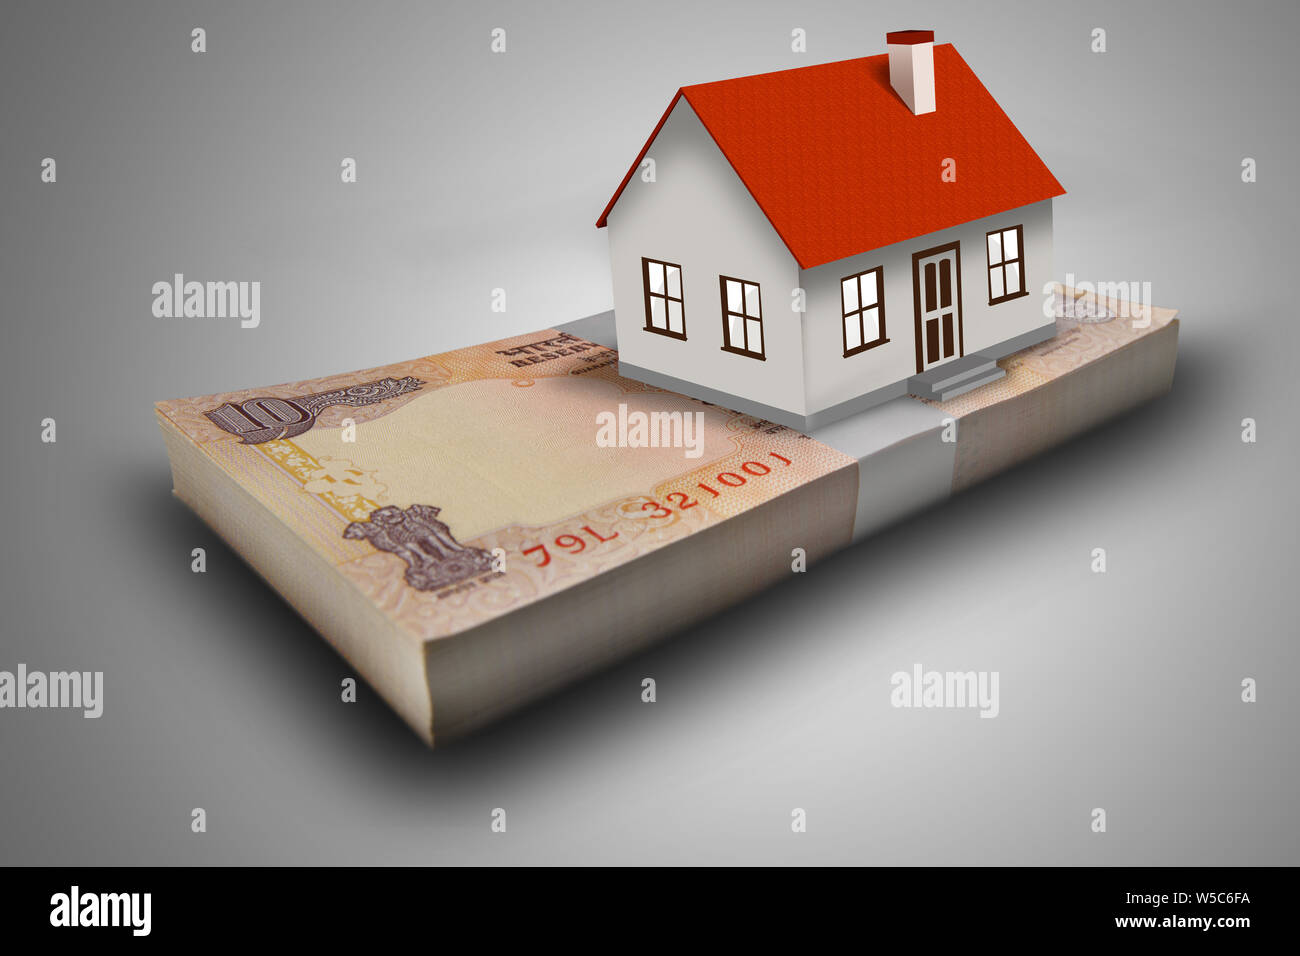 Model home on ten rupee banknotes Stock Photo